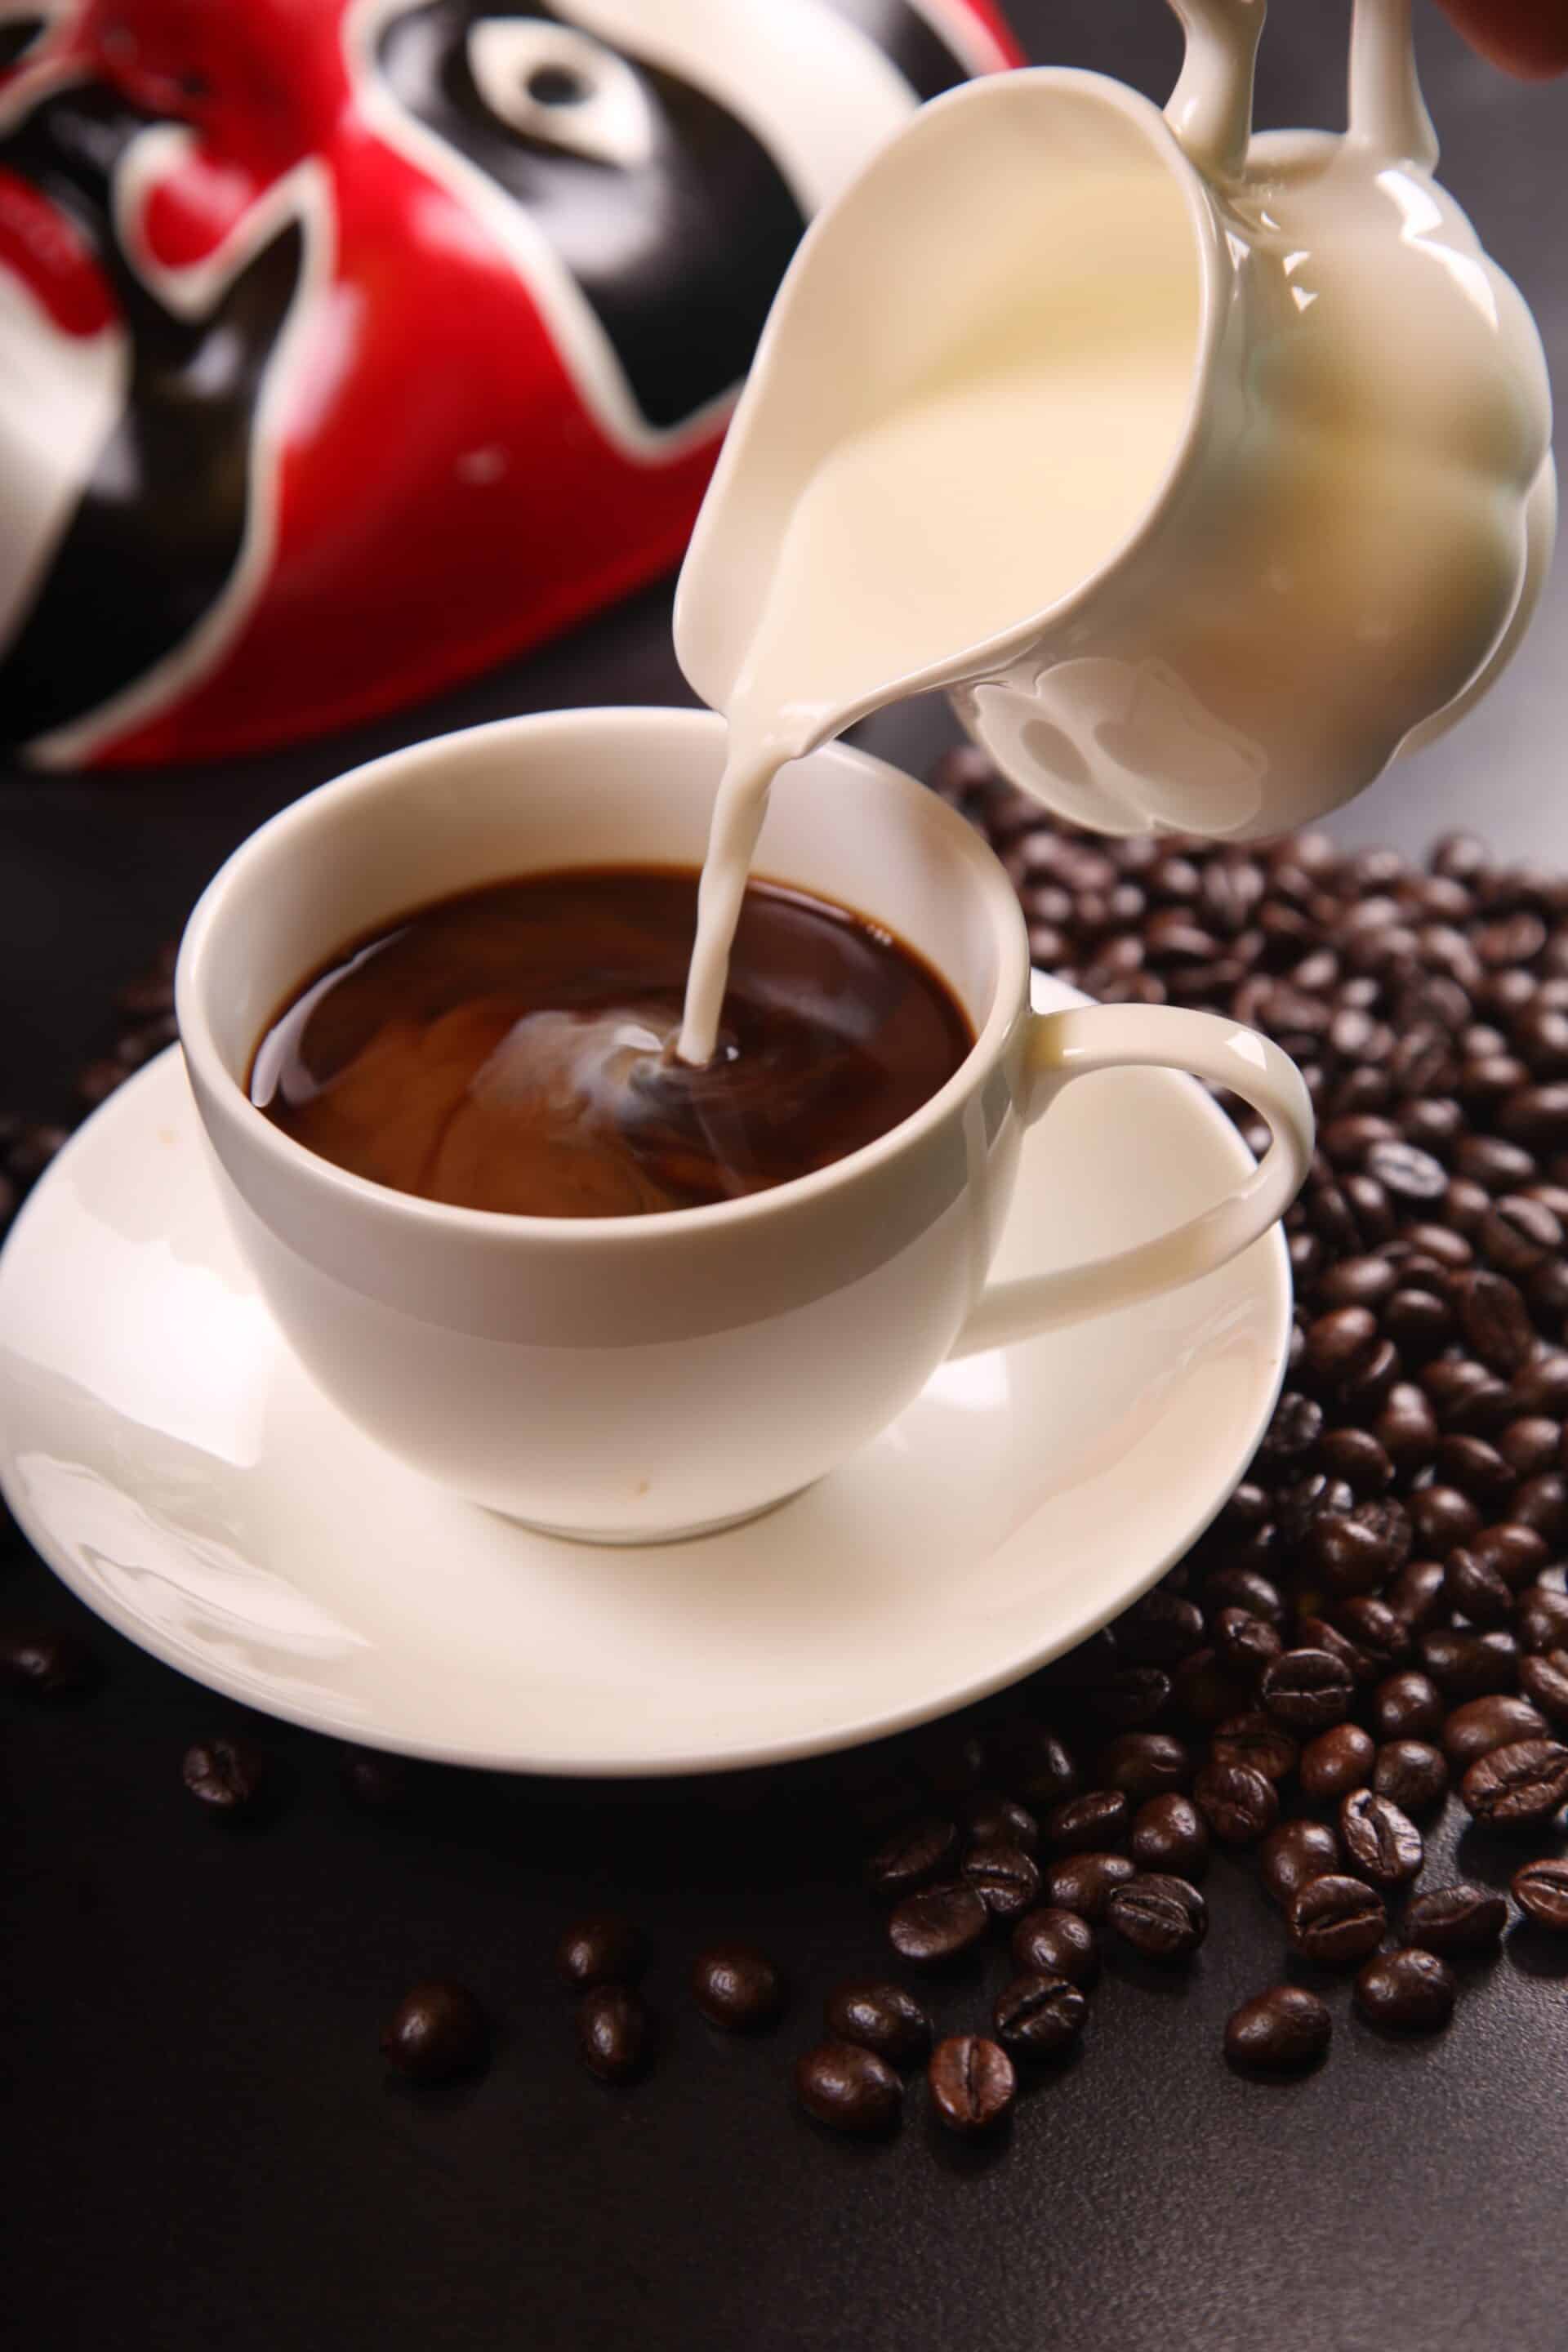 Can I Drink Coffee While Taking Meloxicam?